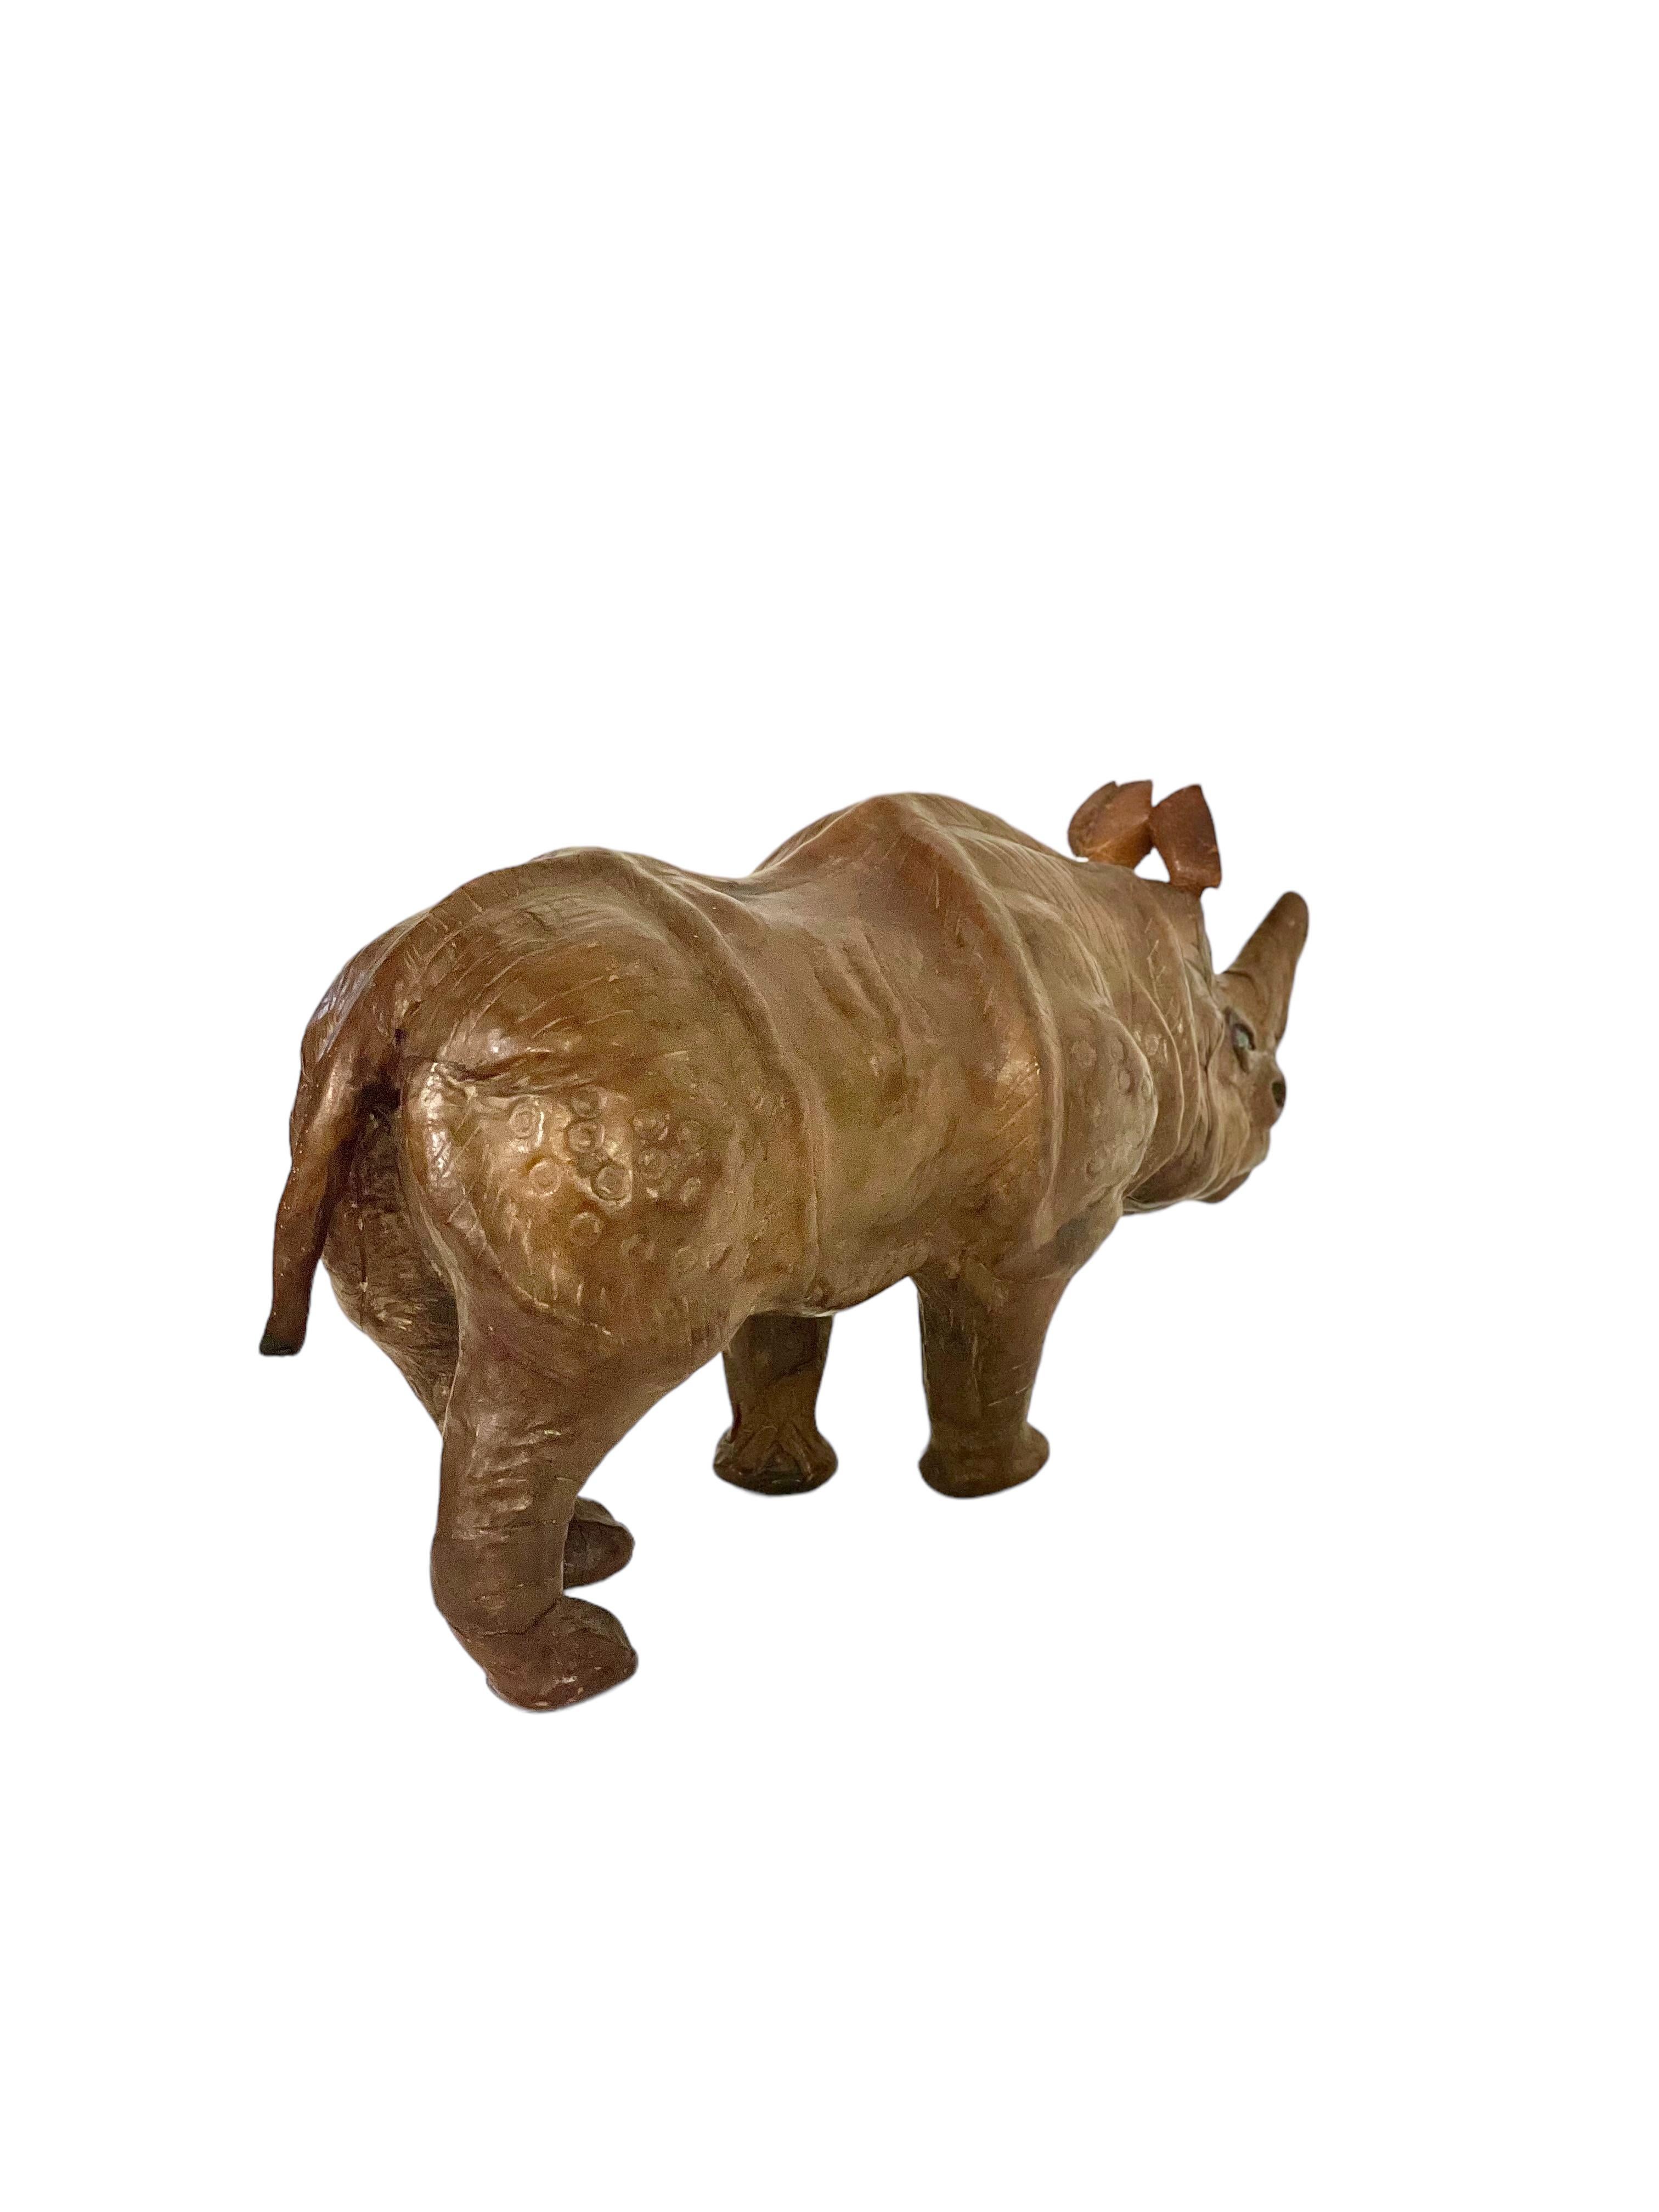 French Vintage Leather Covered Rhinoceros Sculpture For Sale